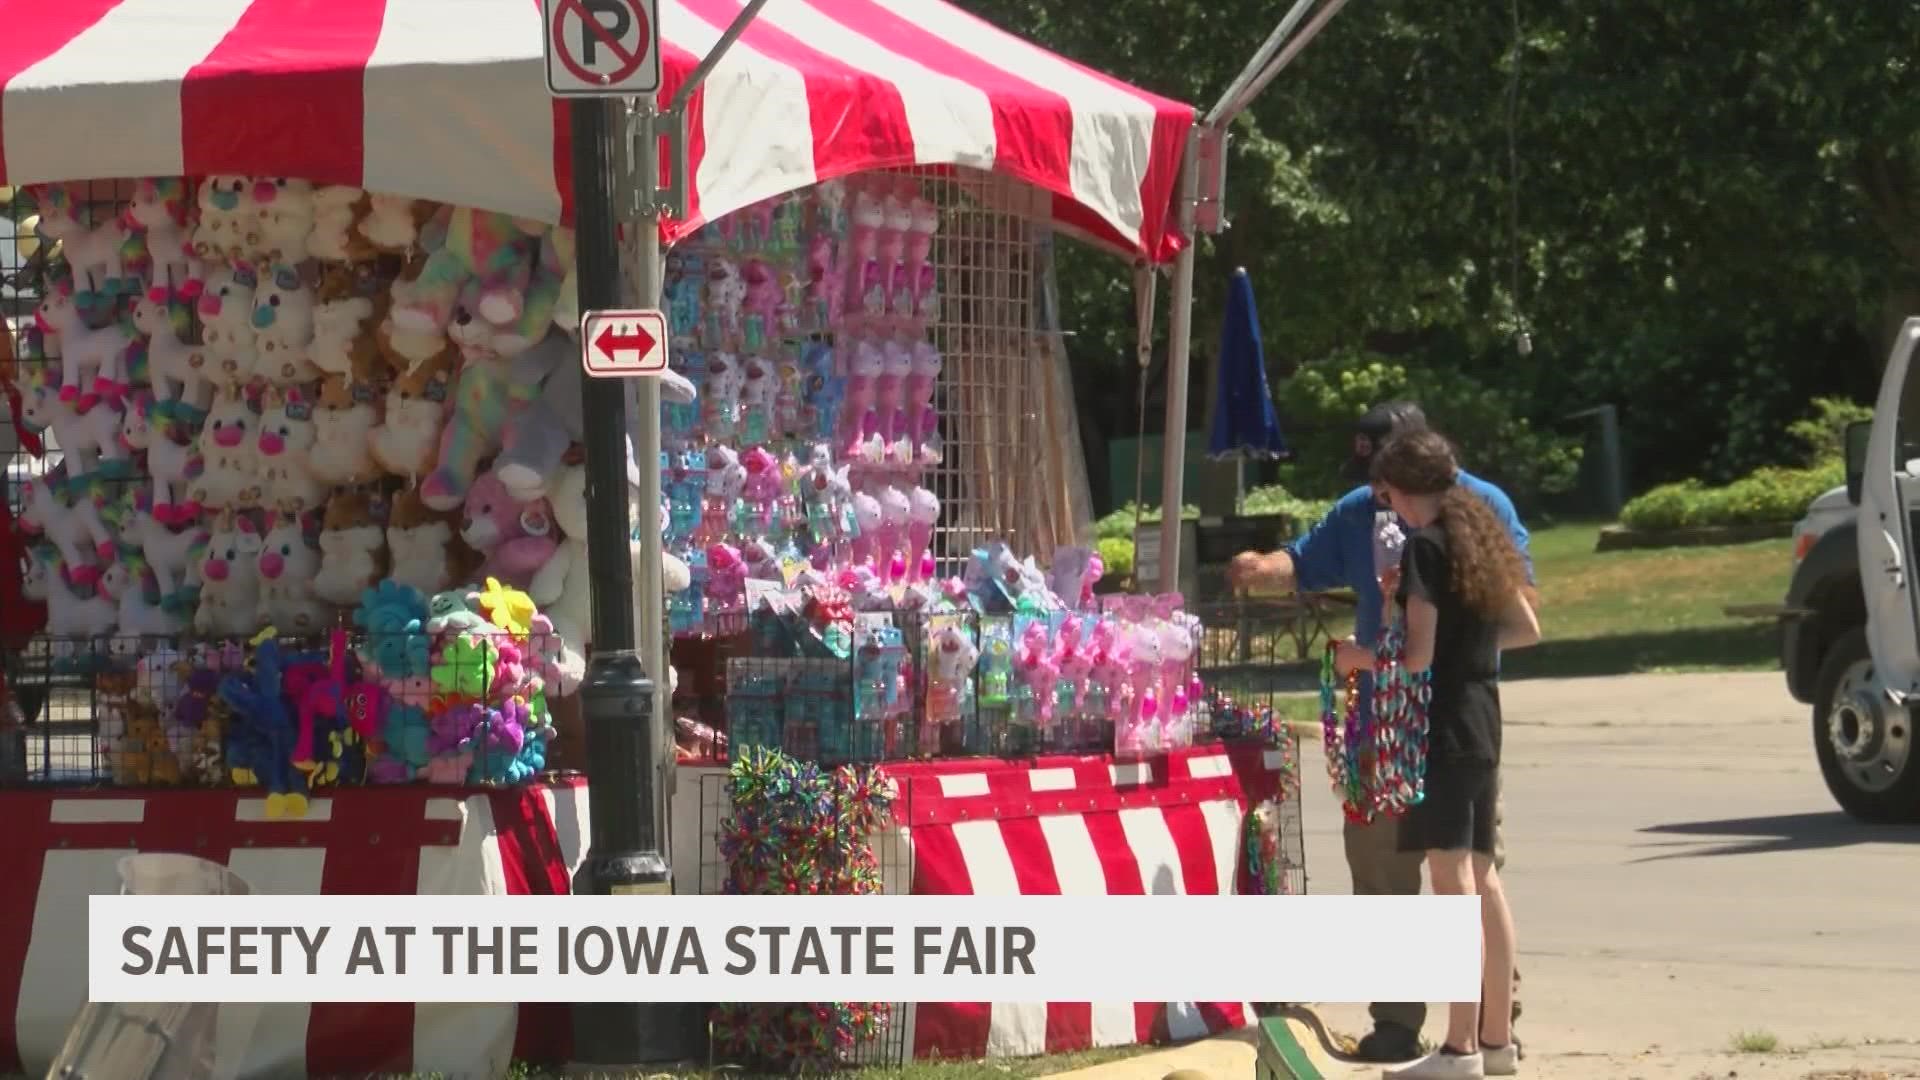 The Des Moines Police Department says they are working diligently with fair security to make the Iowa State Fair secure from start to finish.